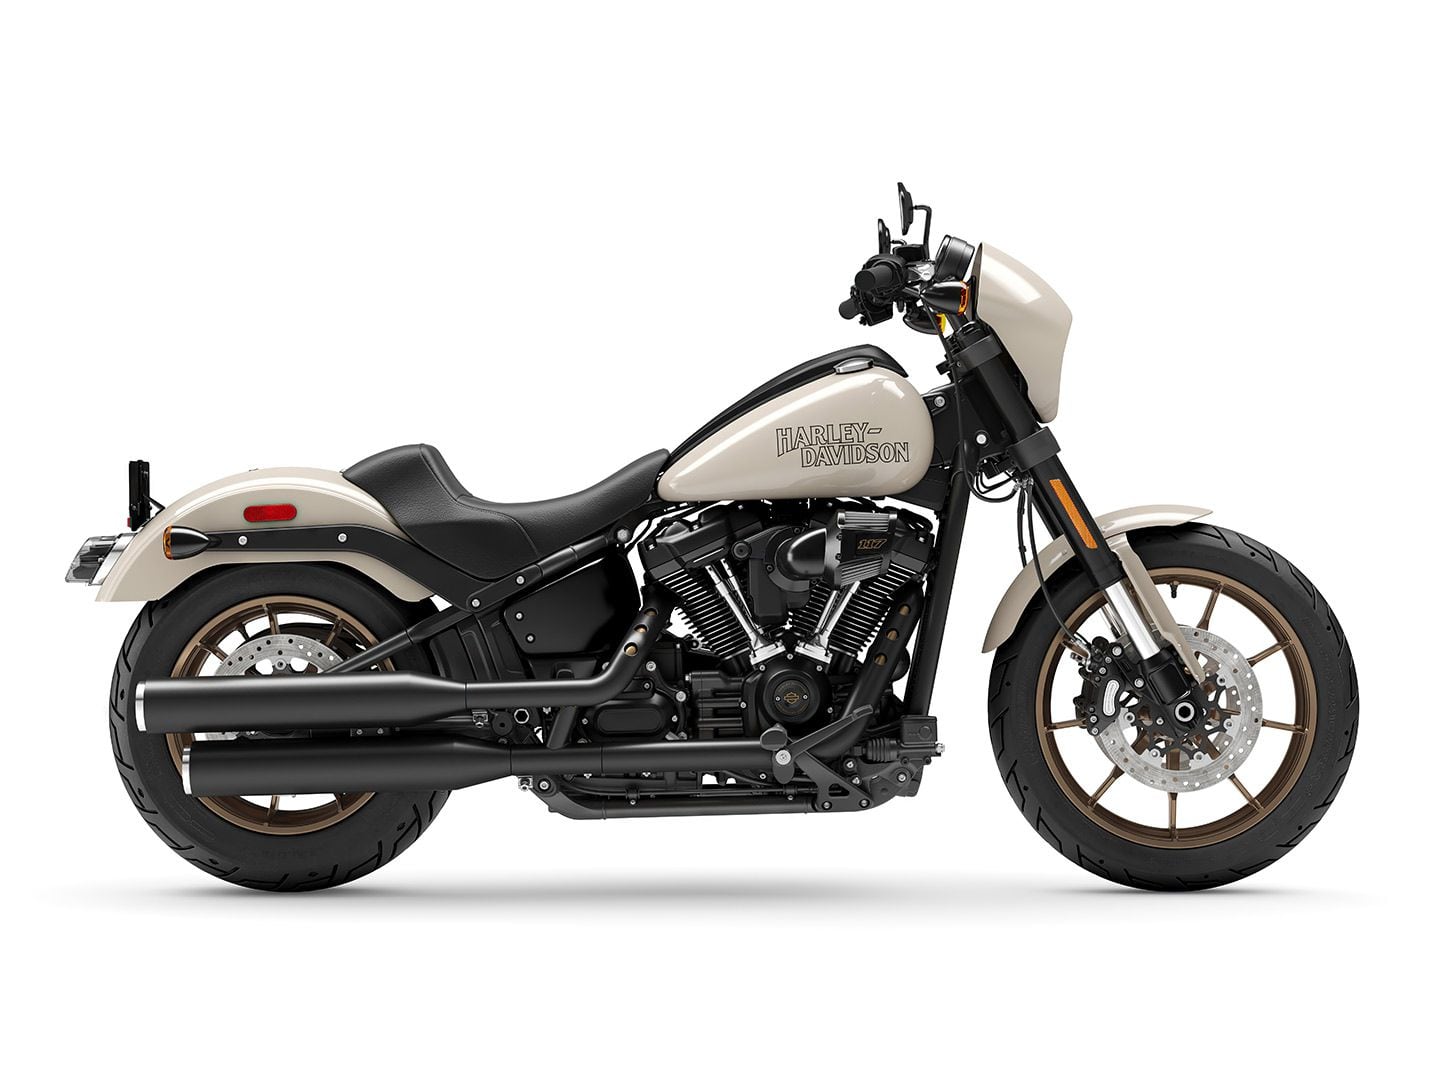 The Low Rider S is Harley’s performance cruiser with a classic style for the lone-wolf rider.